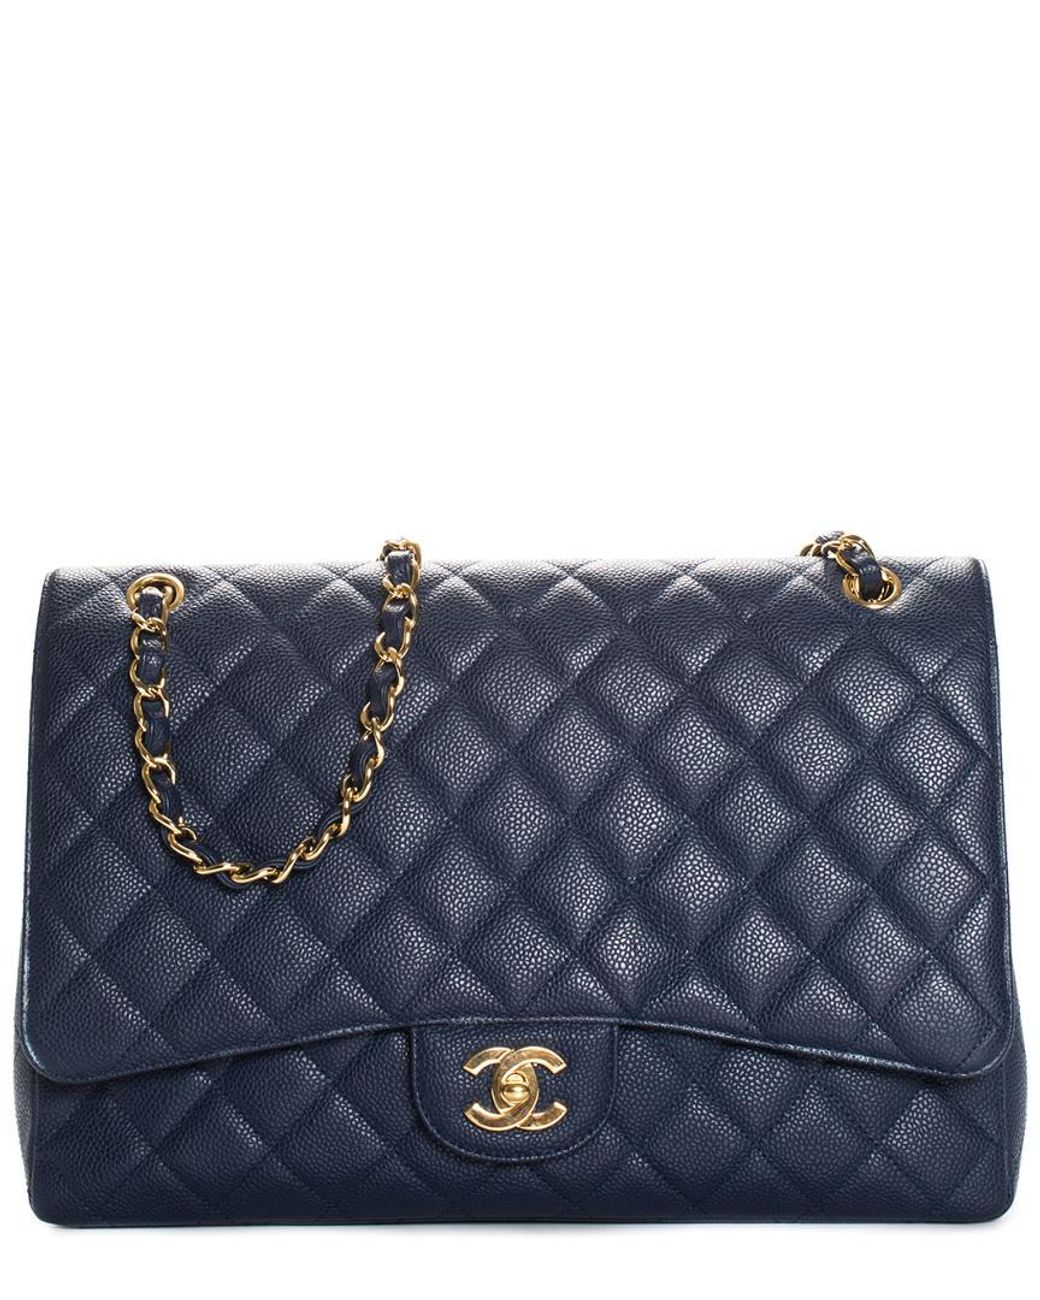 Chanel Navy Blue Quilted Patent Leather Maxi Single Flap Bag with, Lot  #58232